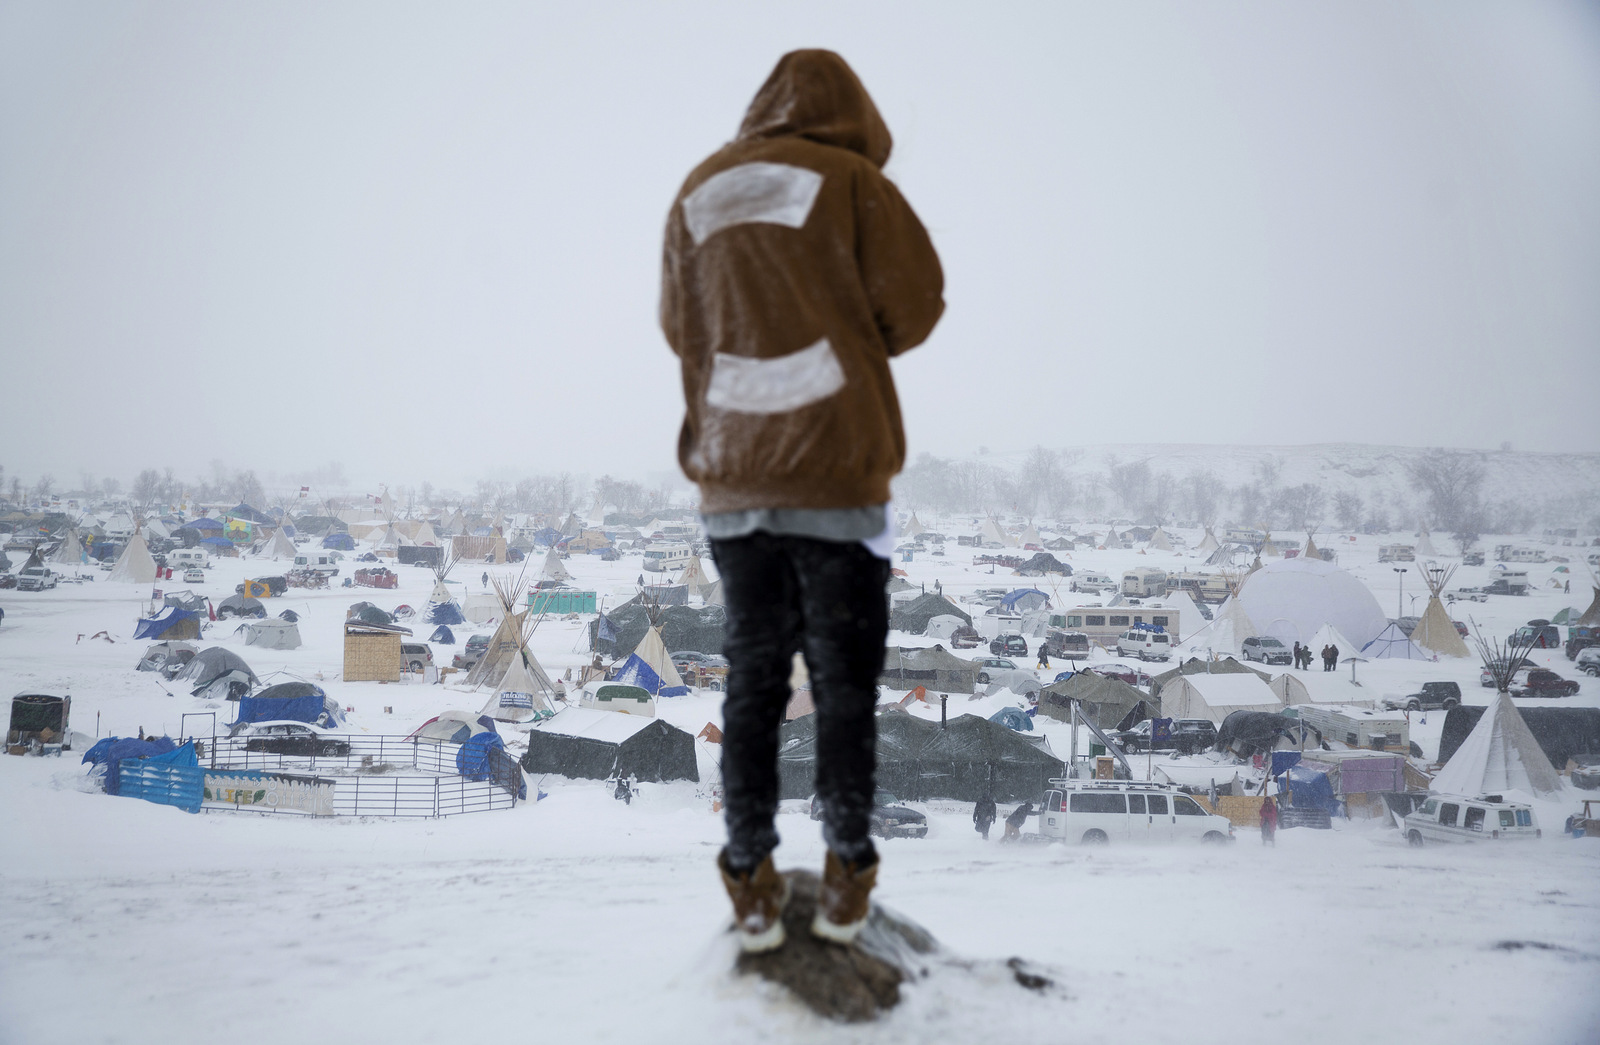 Damin Radford of New Zealand stands overlooking the Oceti Sakowin camp where people have gathered to protest the Dakota Access pipeline near Cannon Ball, N.D. Nov. 29, 2016. (AP Photo/David Goldman)